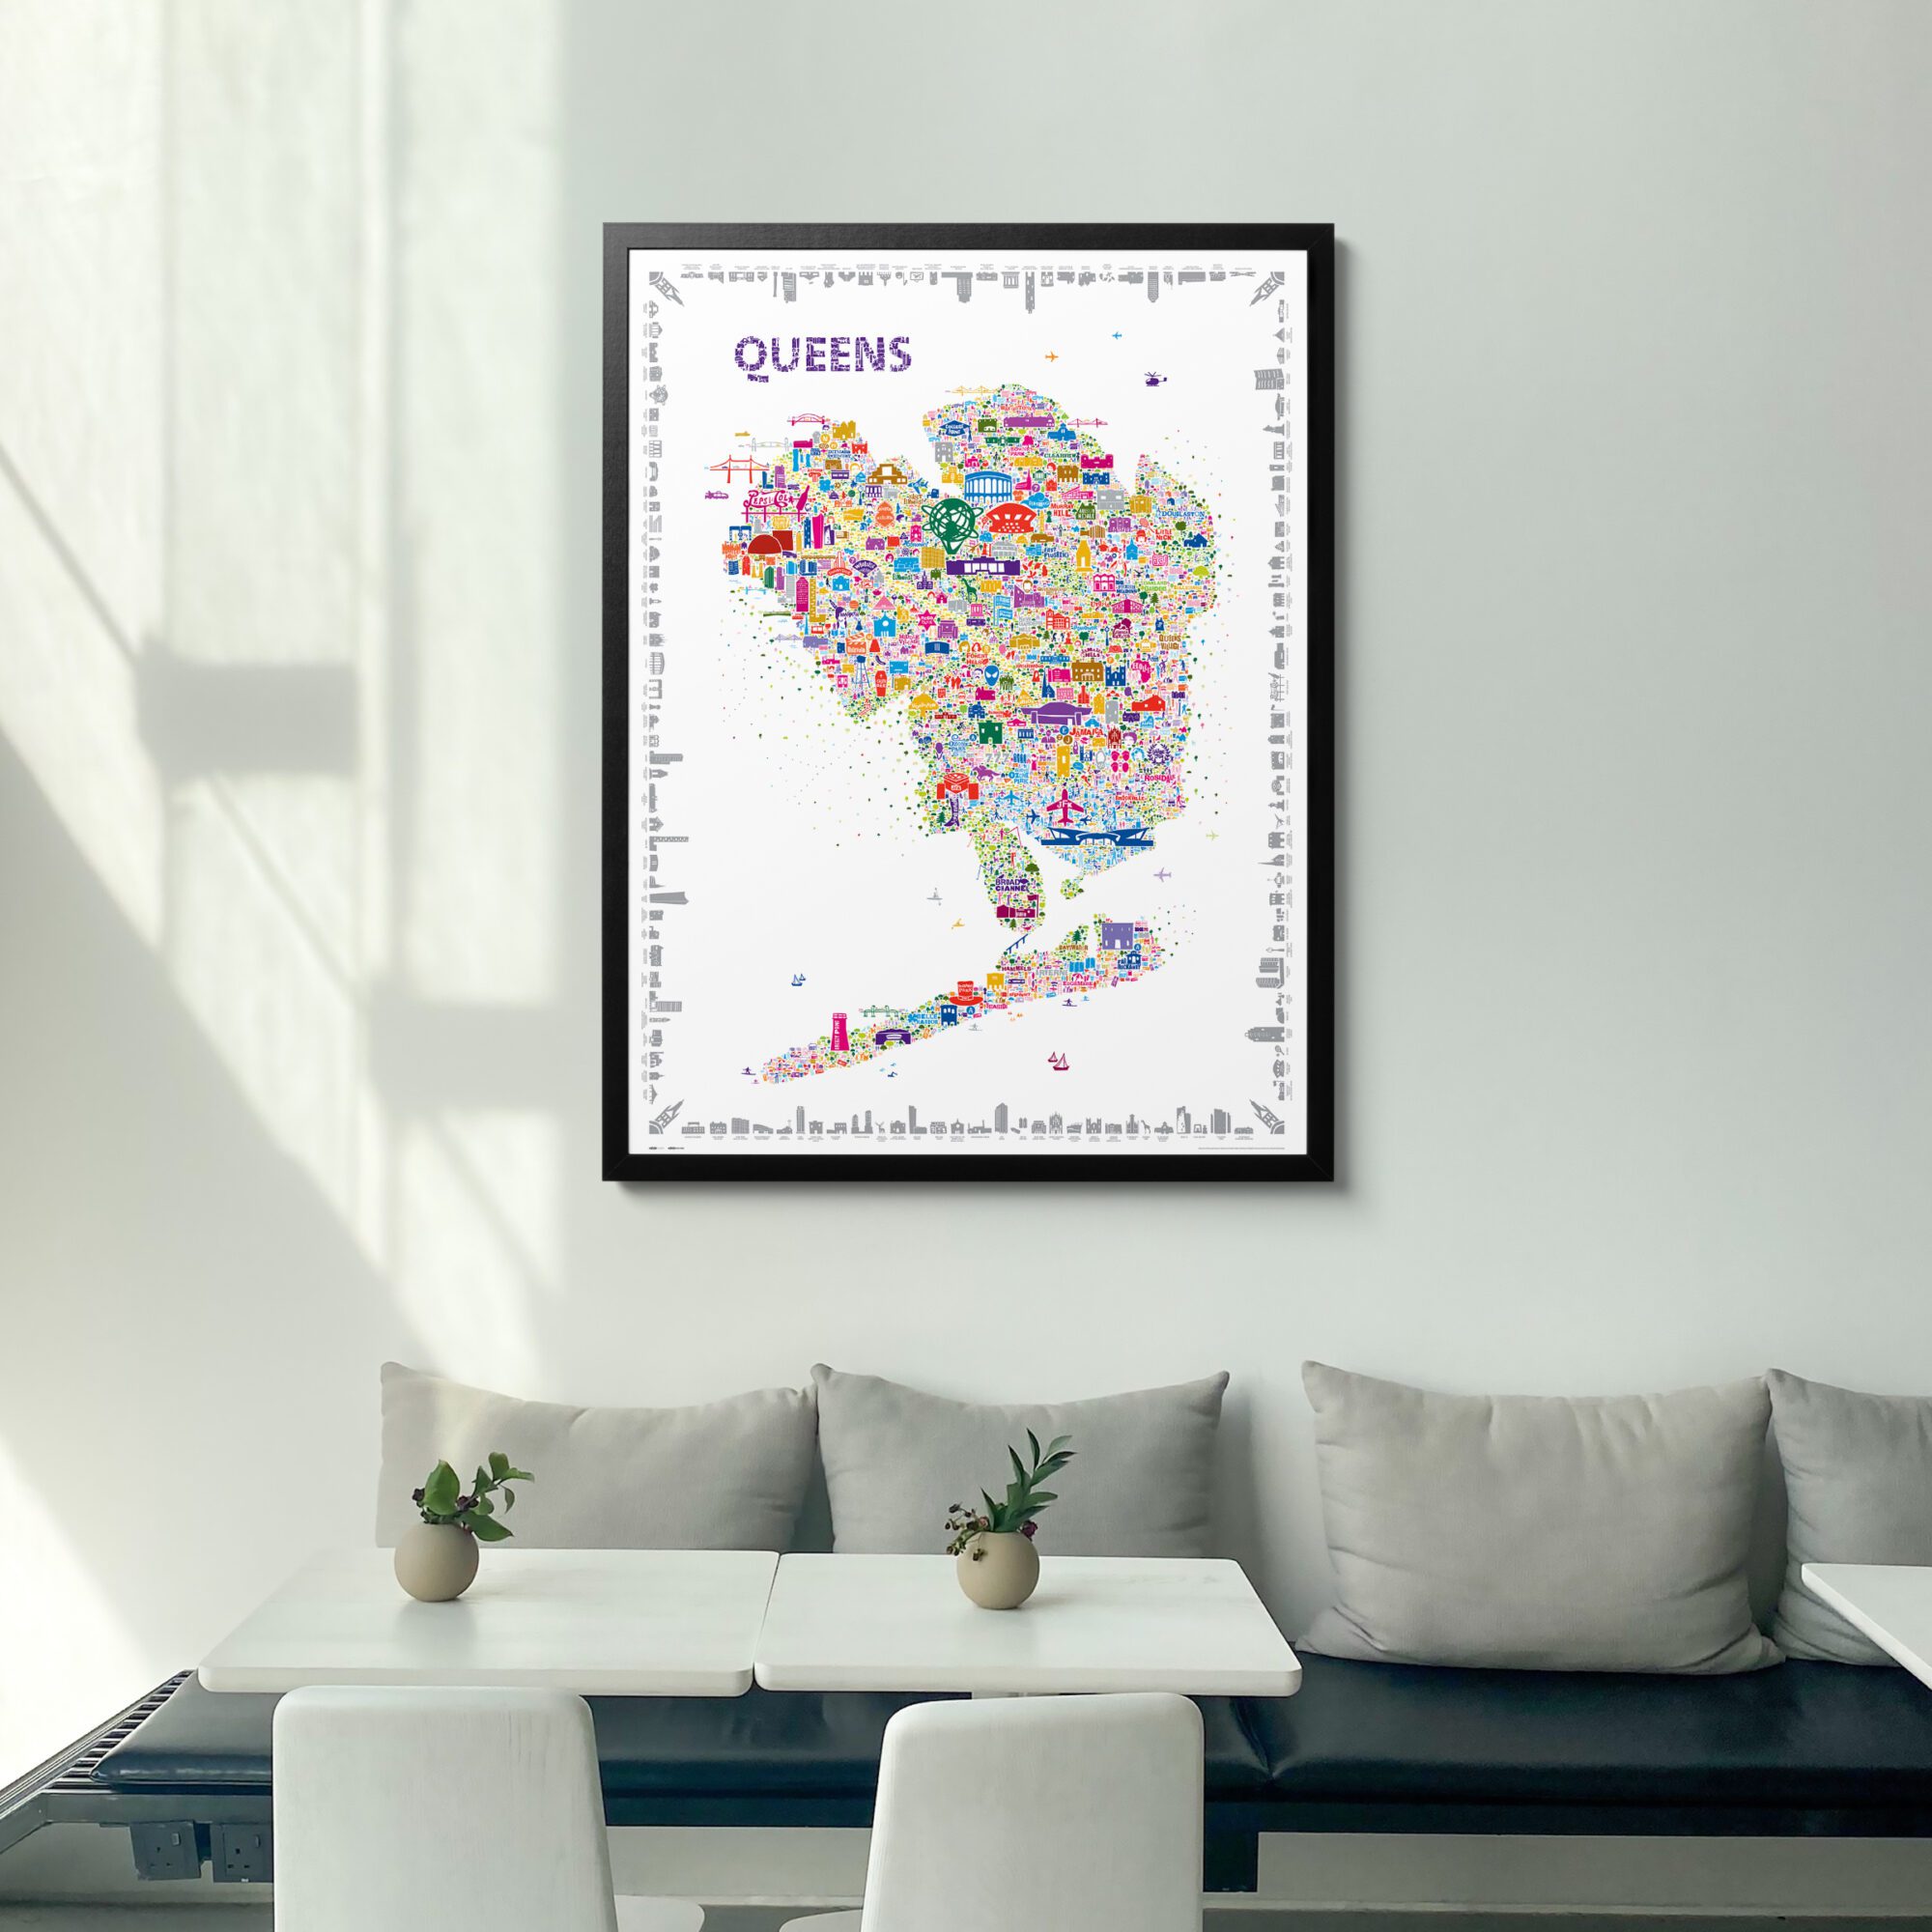 Alfalfa NY Iconic Queens Travel Poster Style Wall Art Print Hipster Vintage Style Home and Apartment Dorm Decor Room Decorations Sleek Modern Map for New Yorker NYC New York Cool Borough Big Apple Fans Aesthetic for Office Living Room Bedroom Kitchen